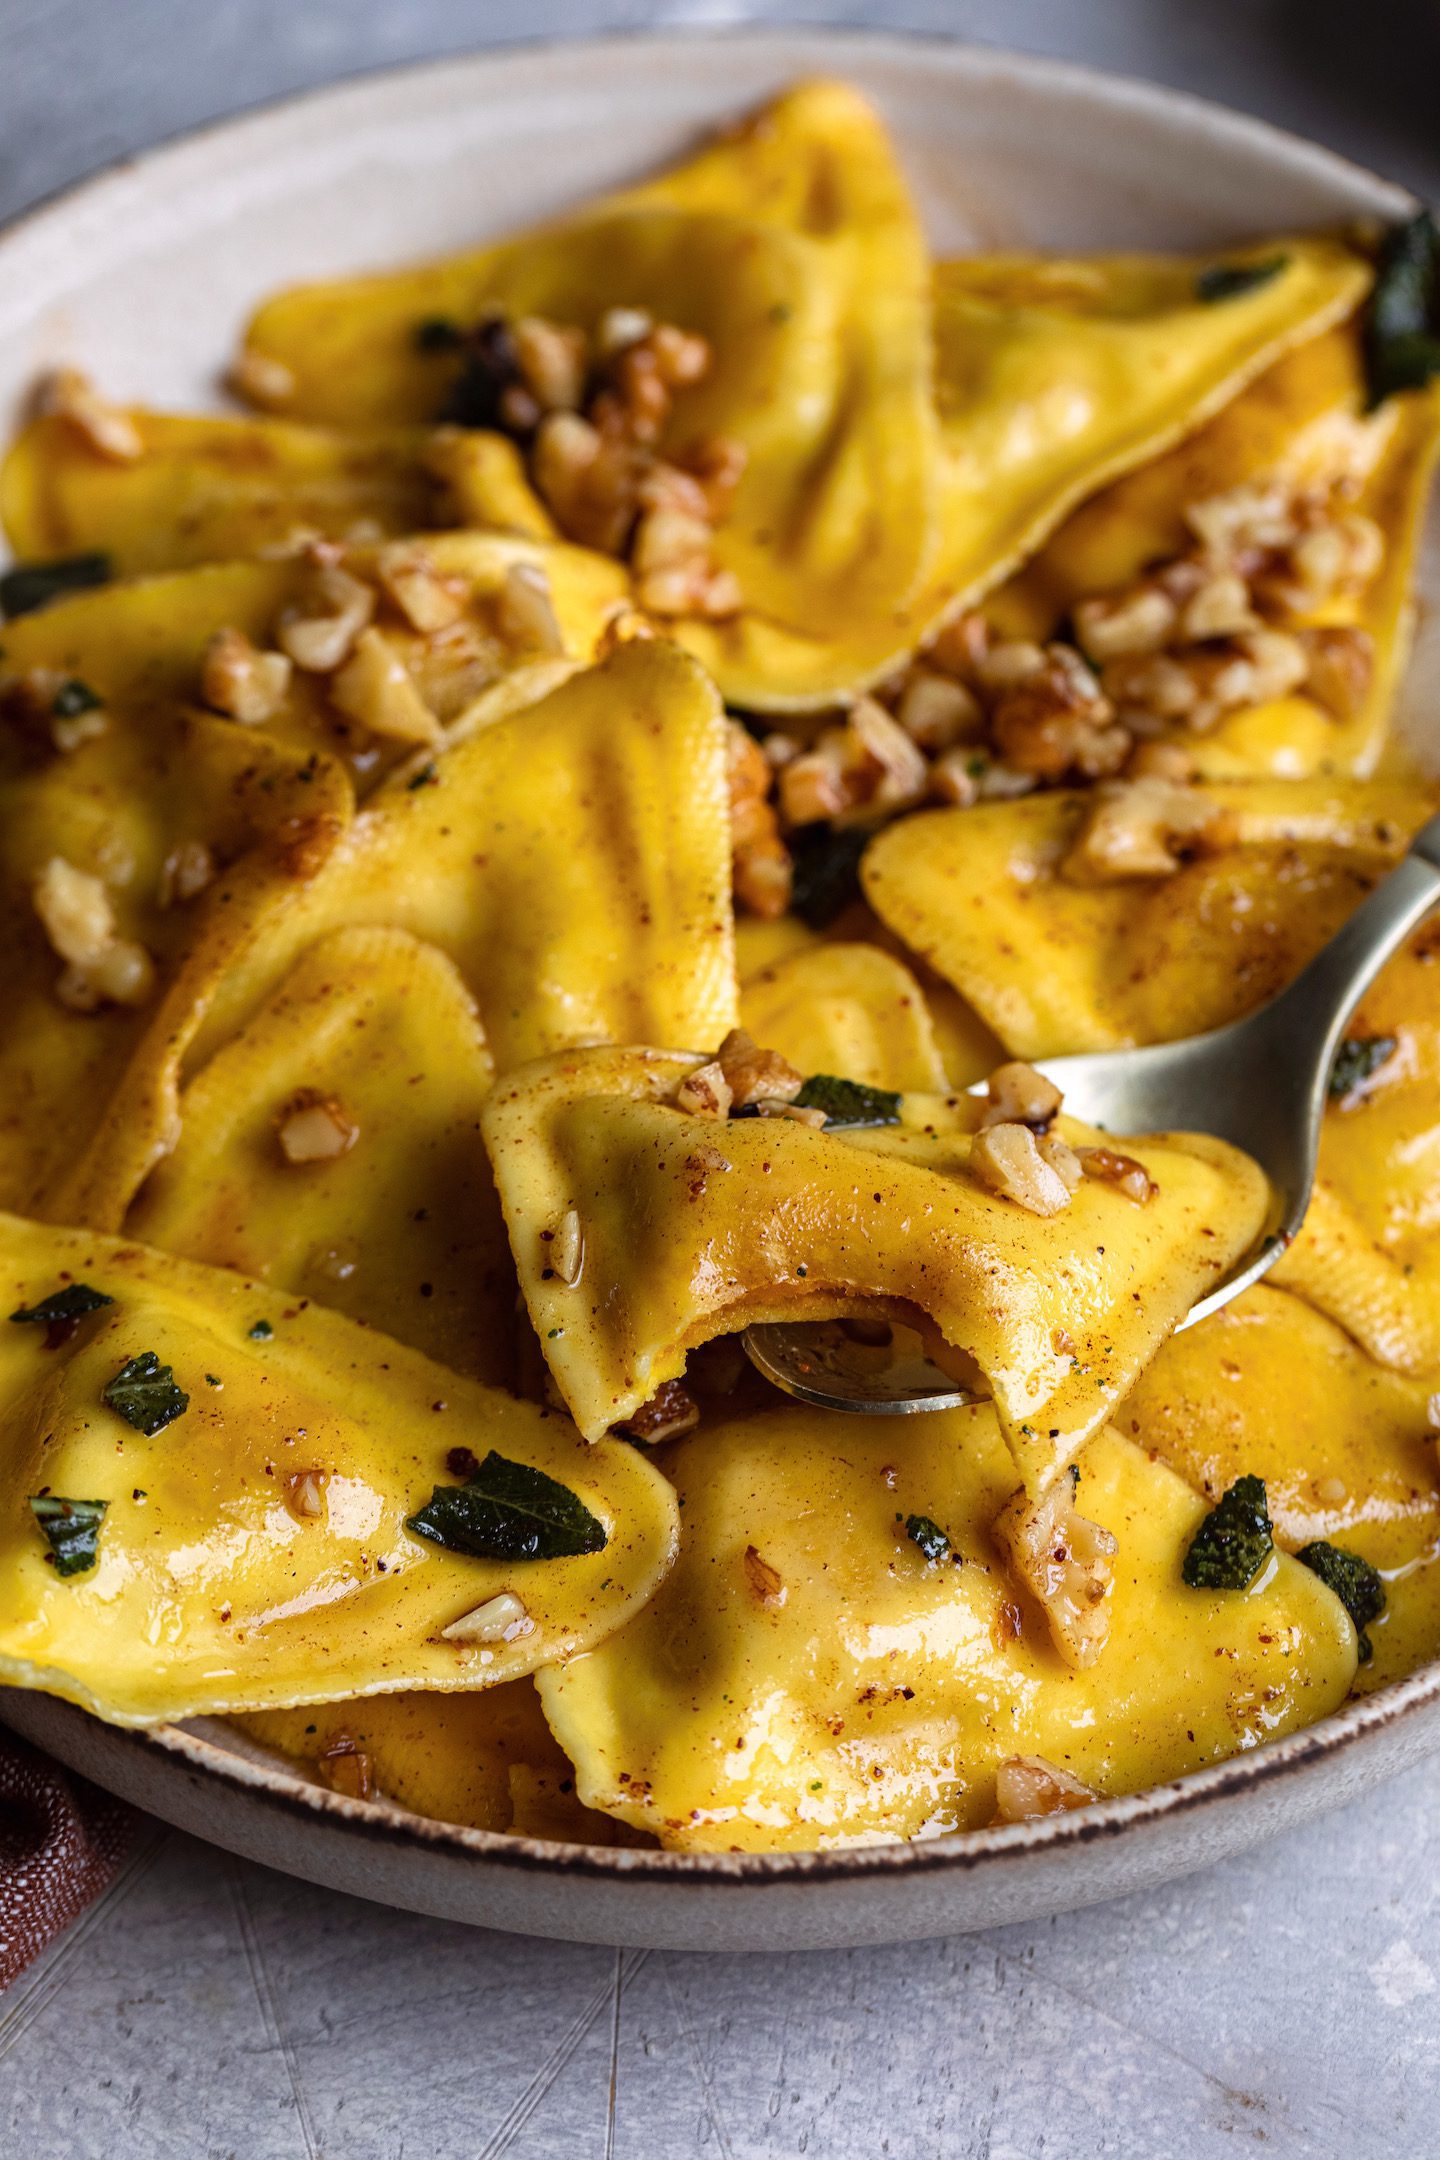 Trader Joe's butternut squash raviolis with a sage nutmeg butter sauce and toasted walnuts make for the perfect cozy and comforting meal!